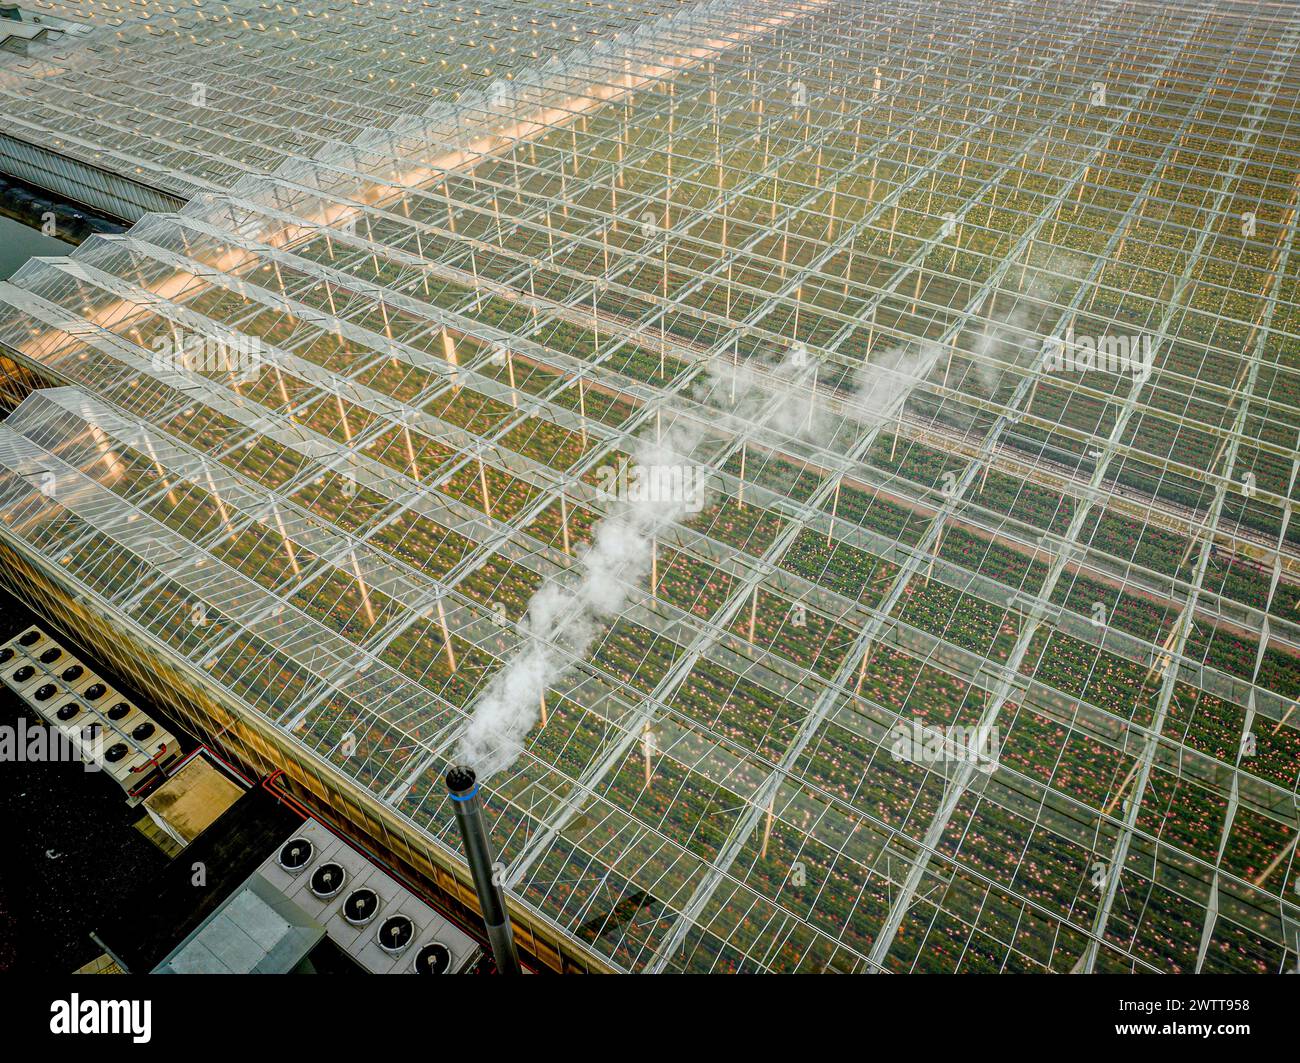 Overhead view of a sprawling greenhouse emitting steam amidst an industrial setting Stock Photo